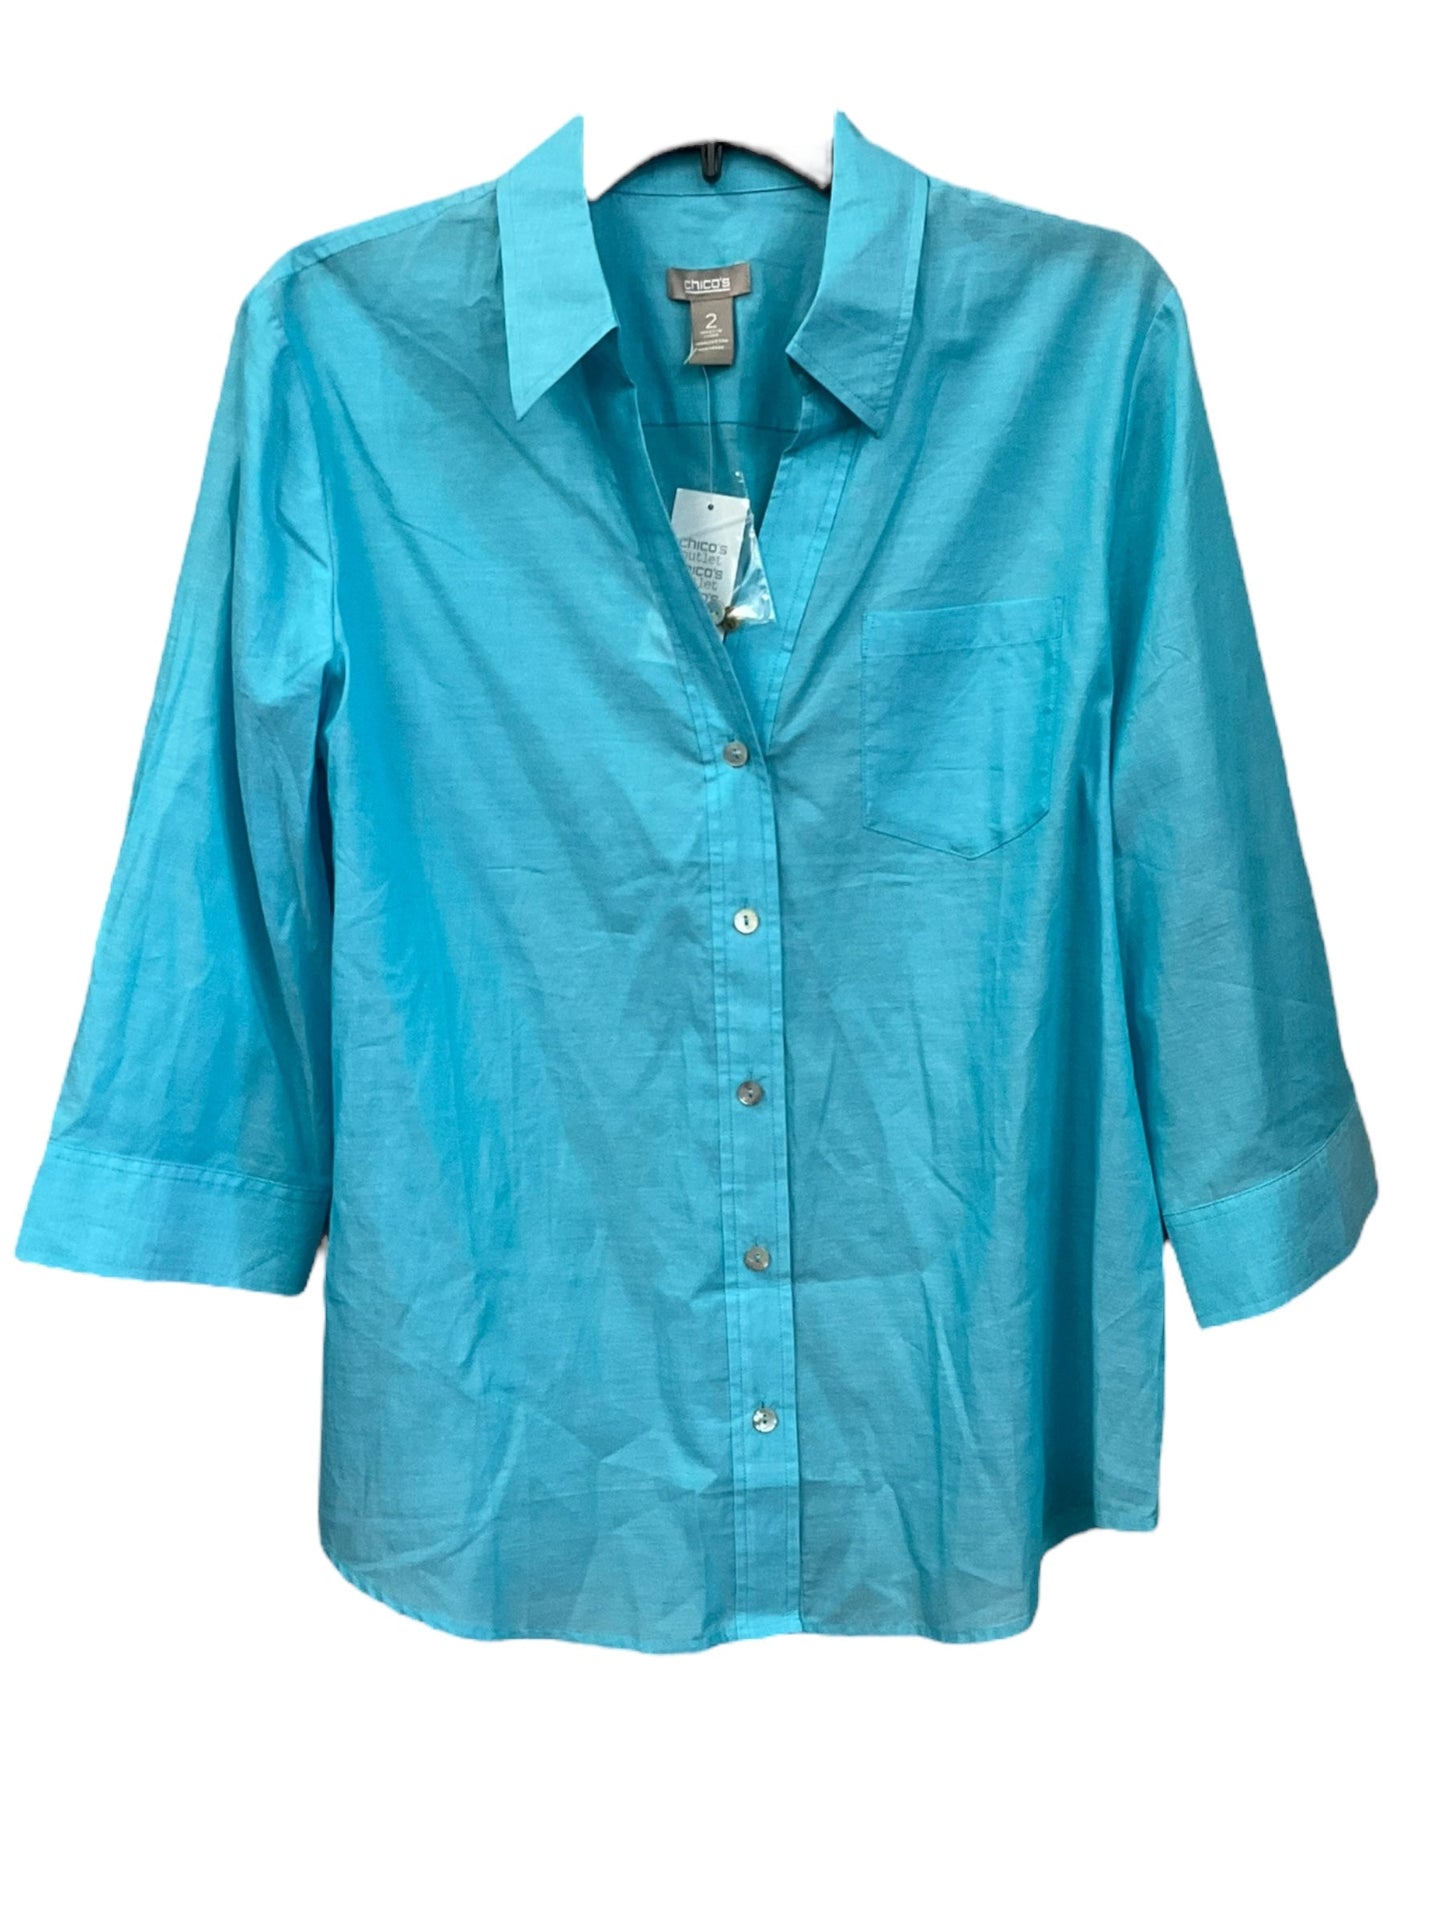 Blue Blouse 3/4 Sleeve Chicos, Size 2x